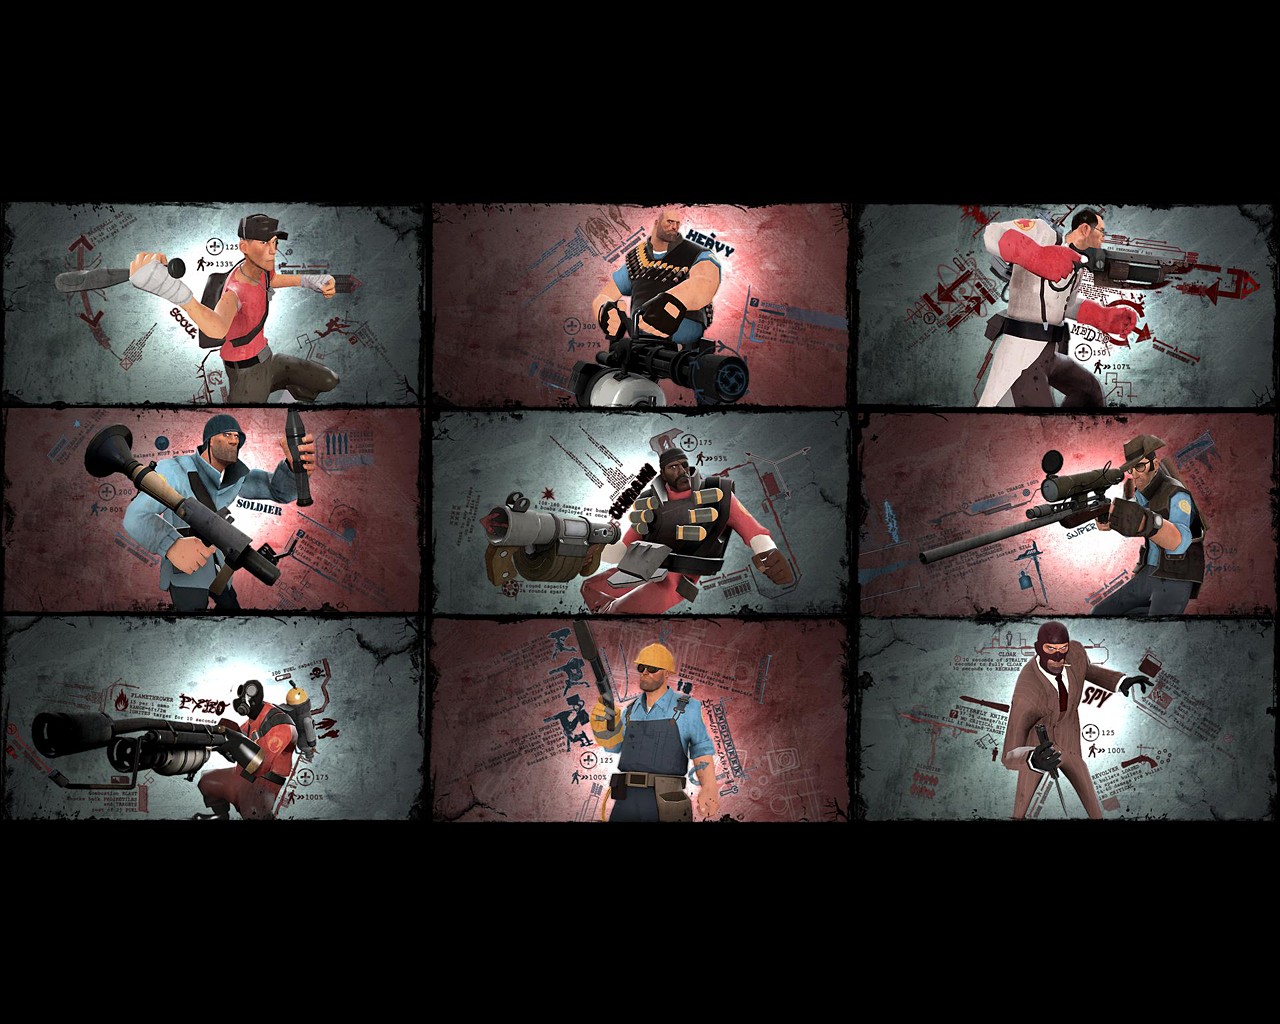 General 1280x1024 video games Team Fortress 2 medicine Sniper (TF2) Heavy (TF2) Pyro (TF2) Spy (character) Soldier (TF2) collage PC gaming video game art Valve Corporation